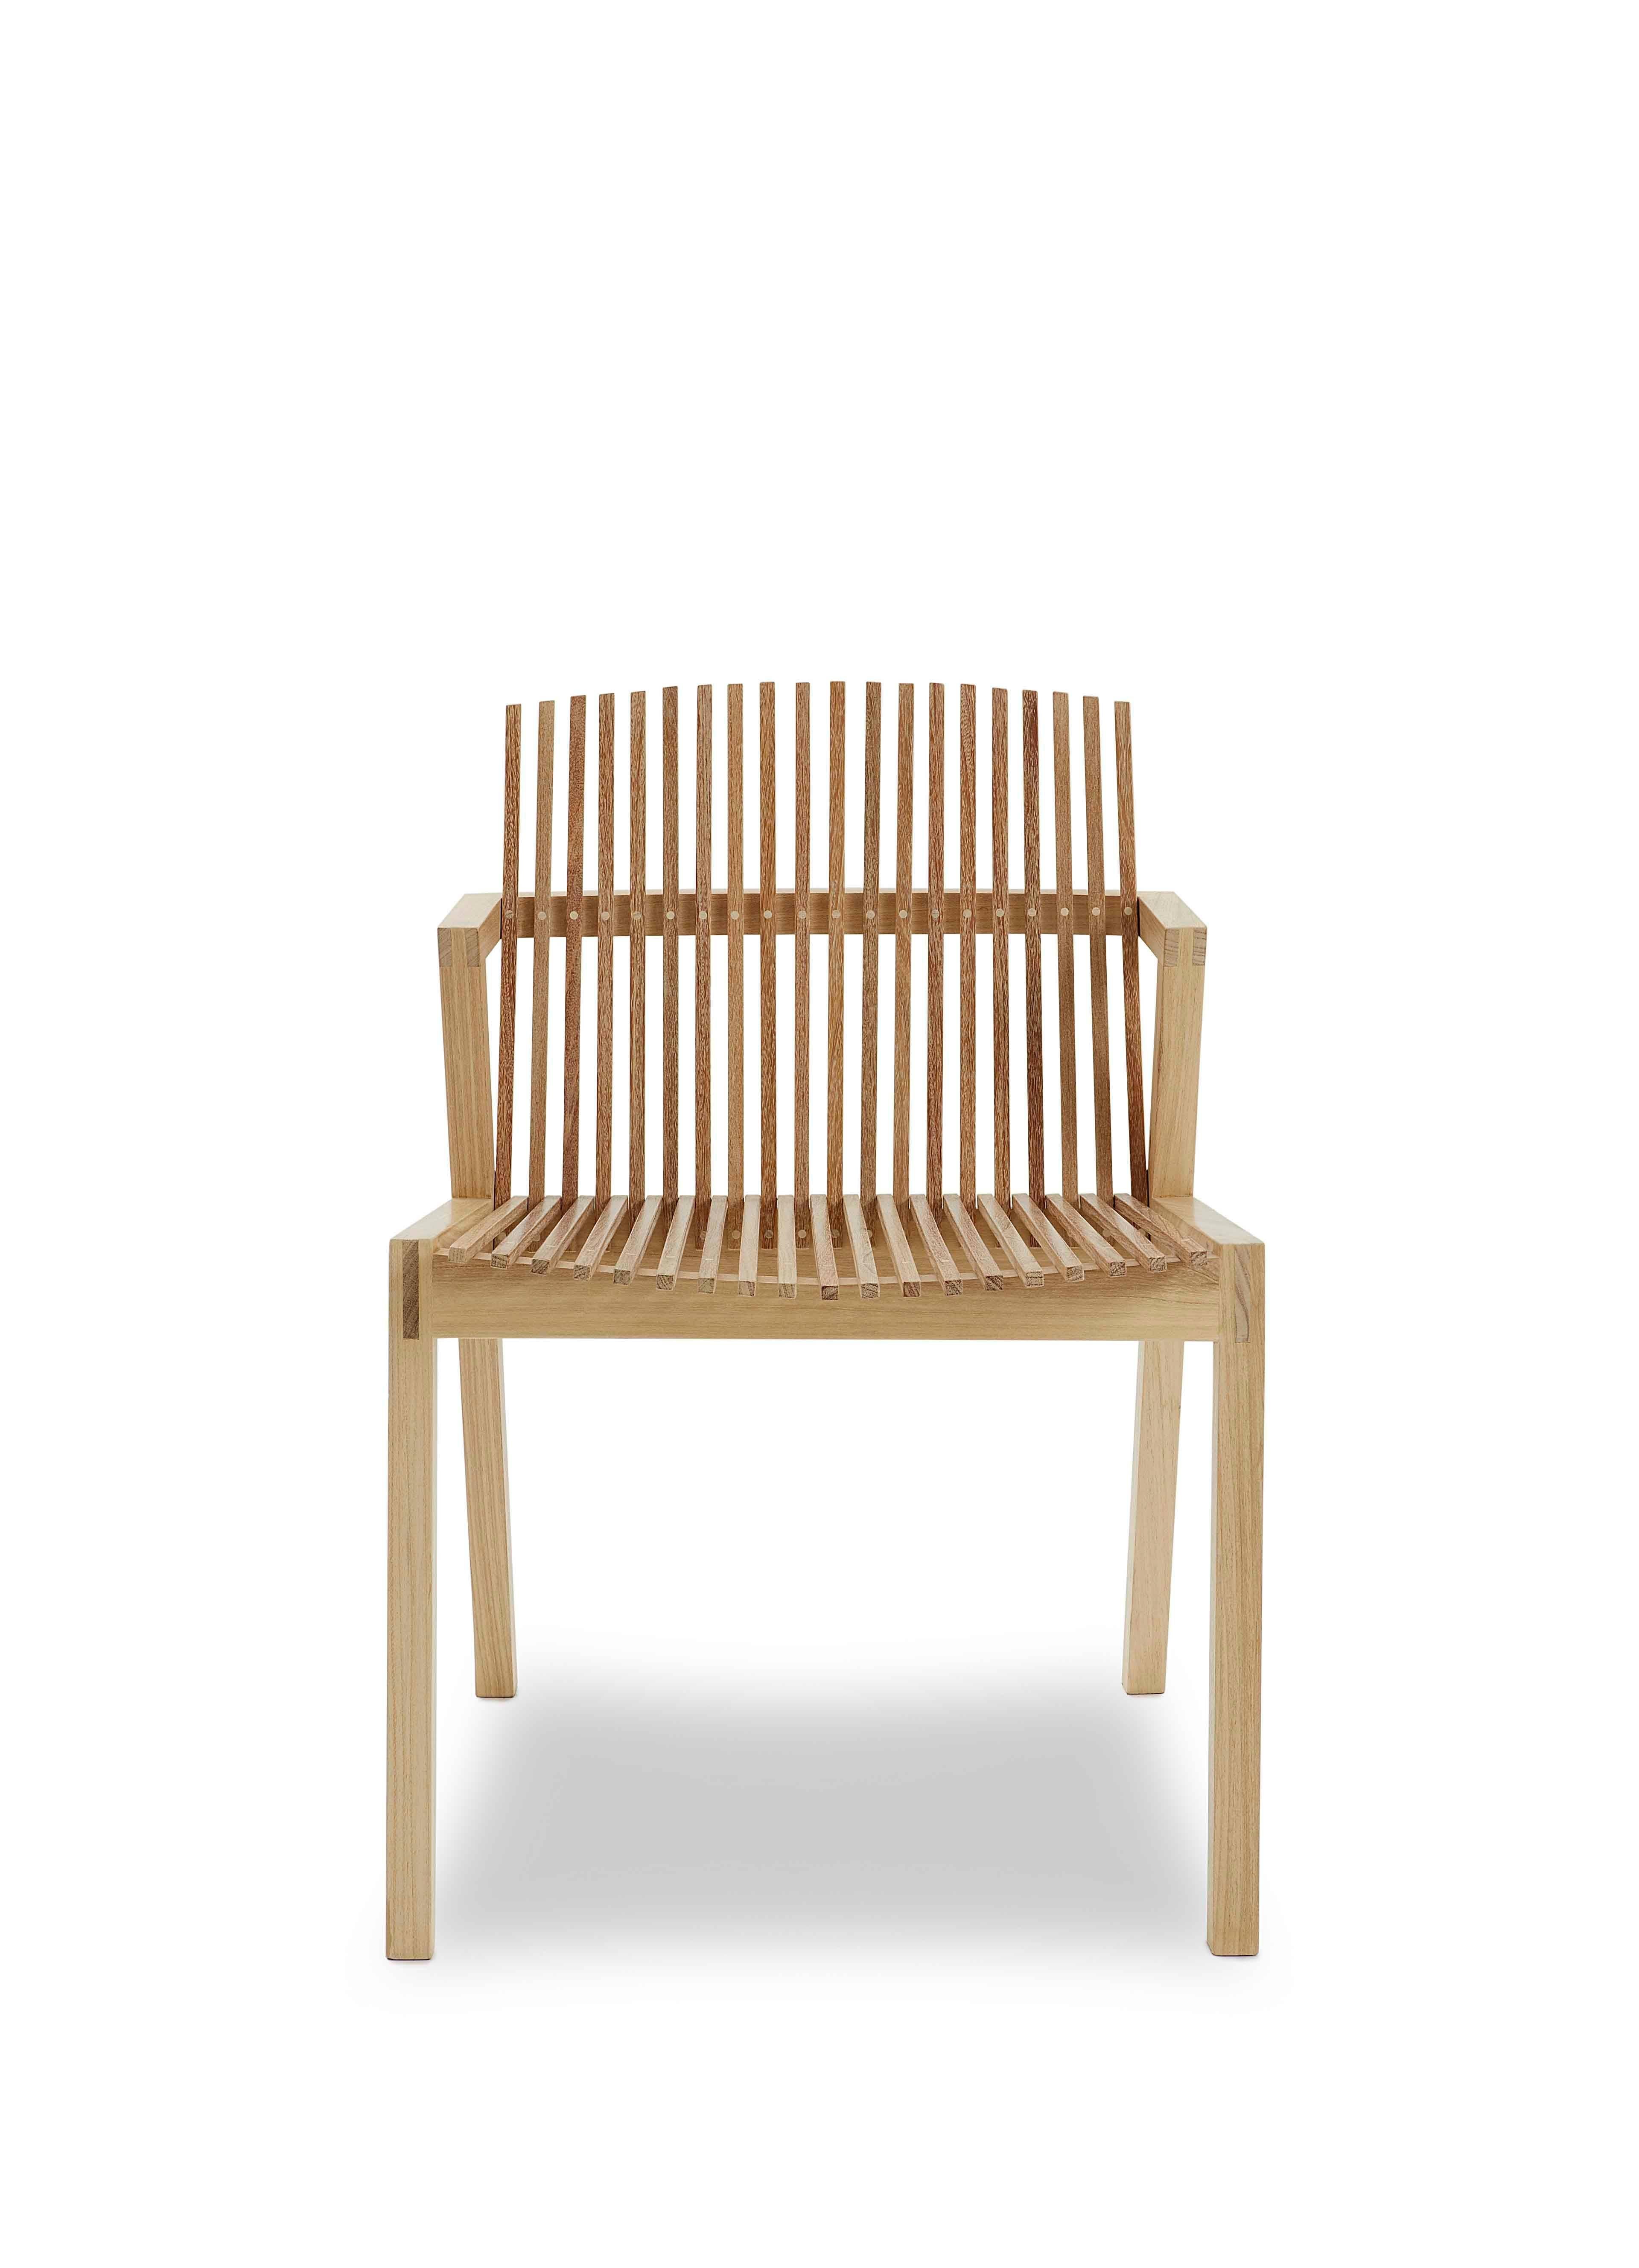 Ergonomic Armchair in Tropical Brazilian Hardwood, Contemporary Style In New Condition For Sale In Sao Paulo, SP